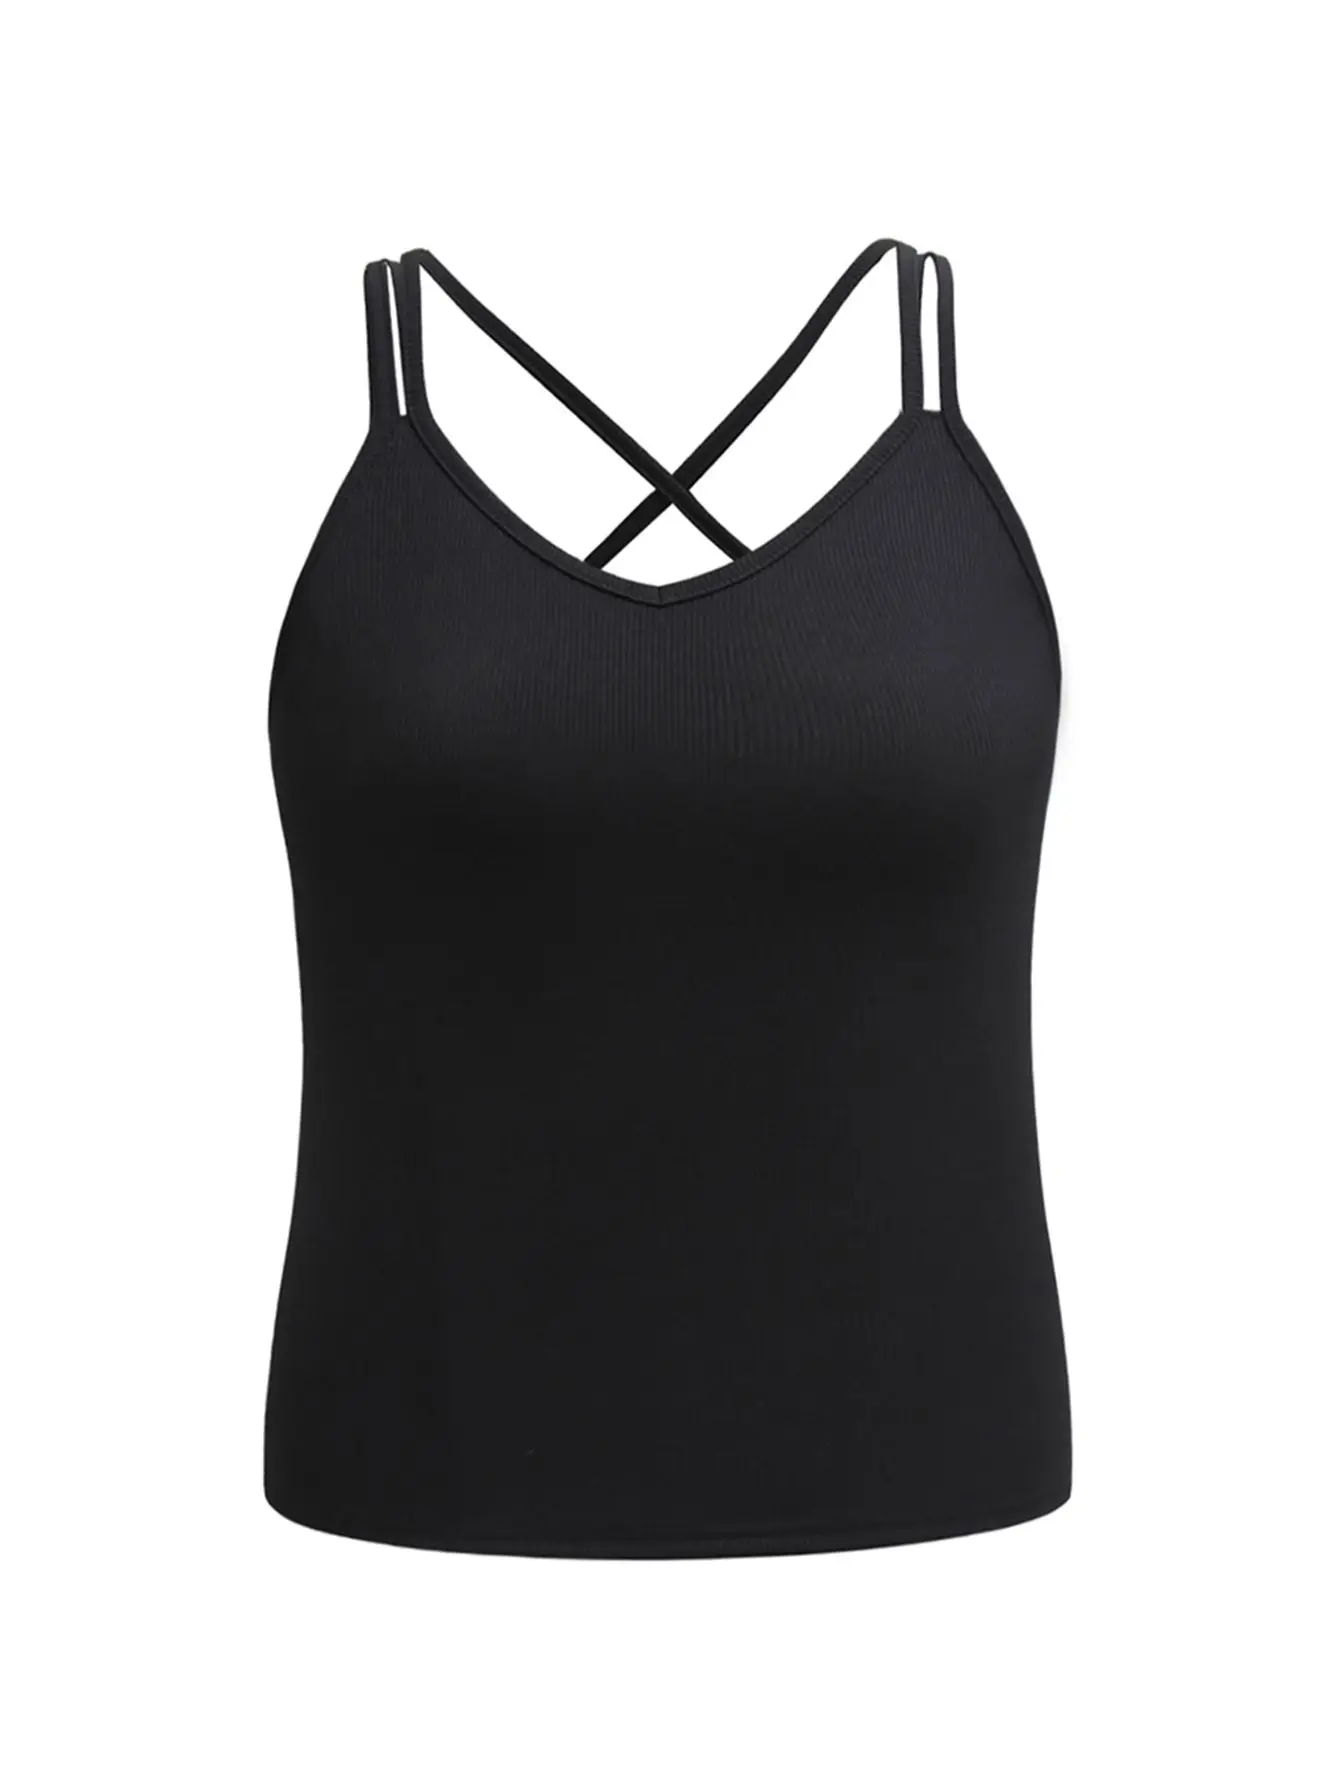 Women's Black Sexy Casual Camisoles V Neck Sleeveless Plus Size 4XL Blouses Oversized Solid Cotton T Shirts Fall Summer Fashion